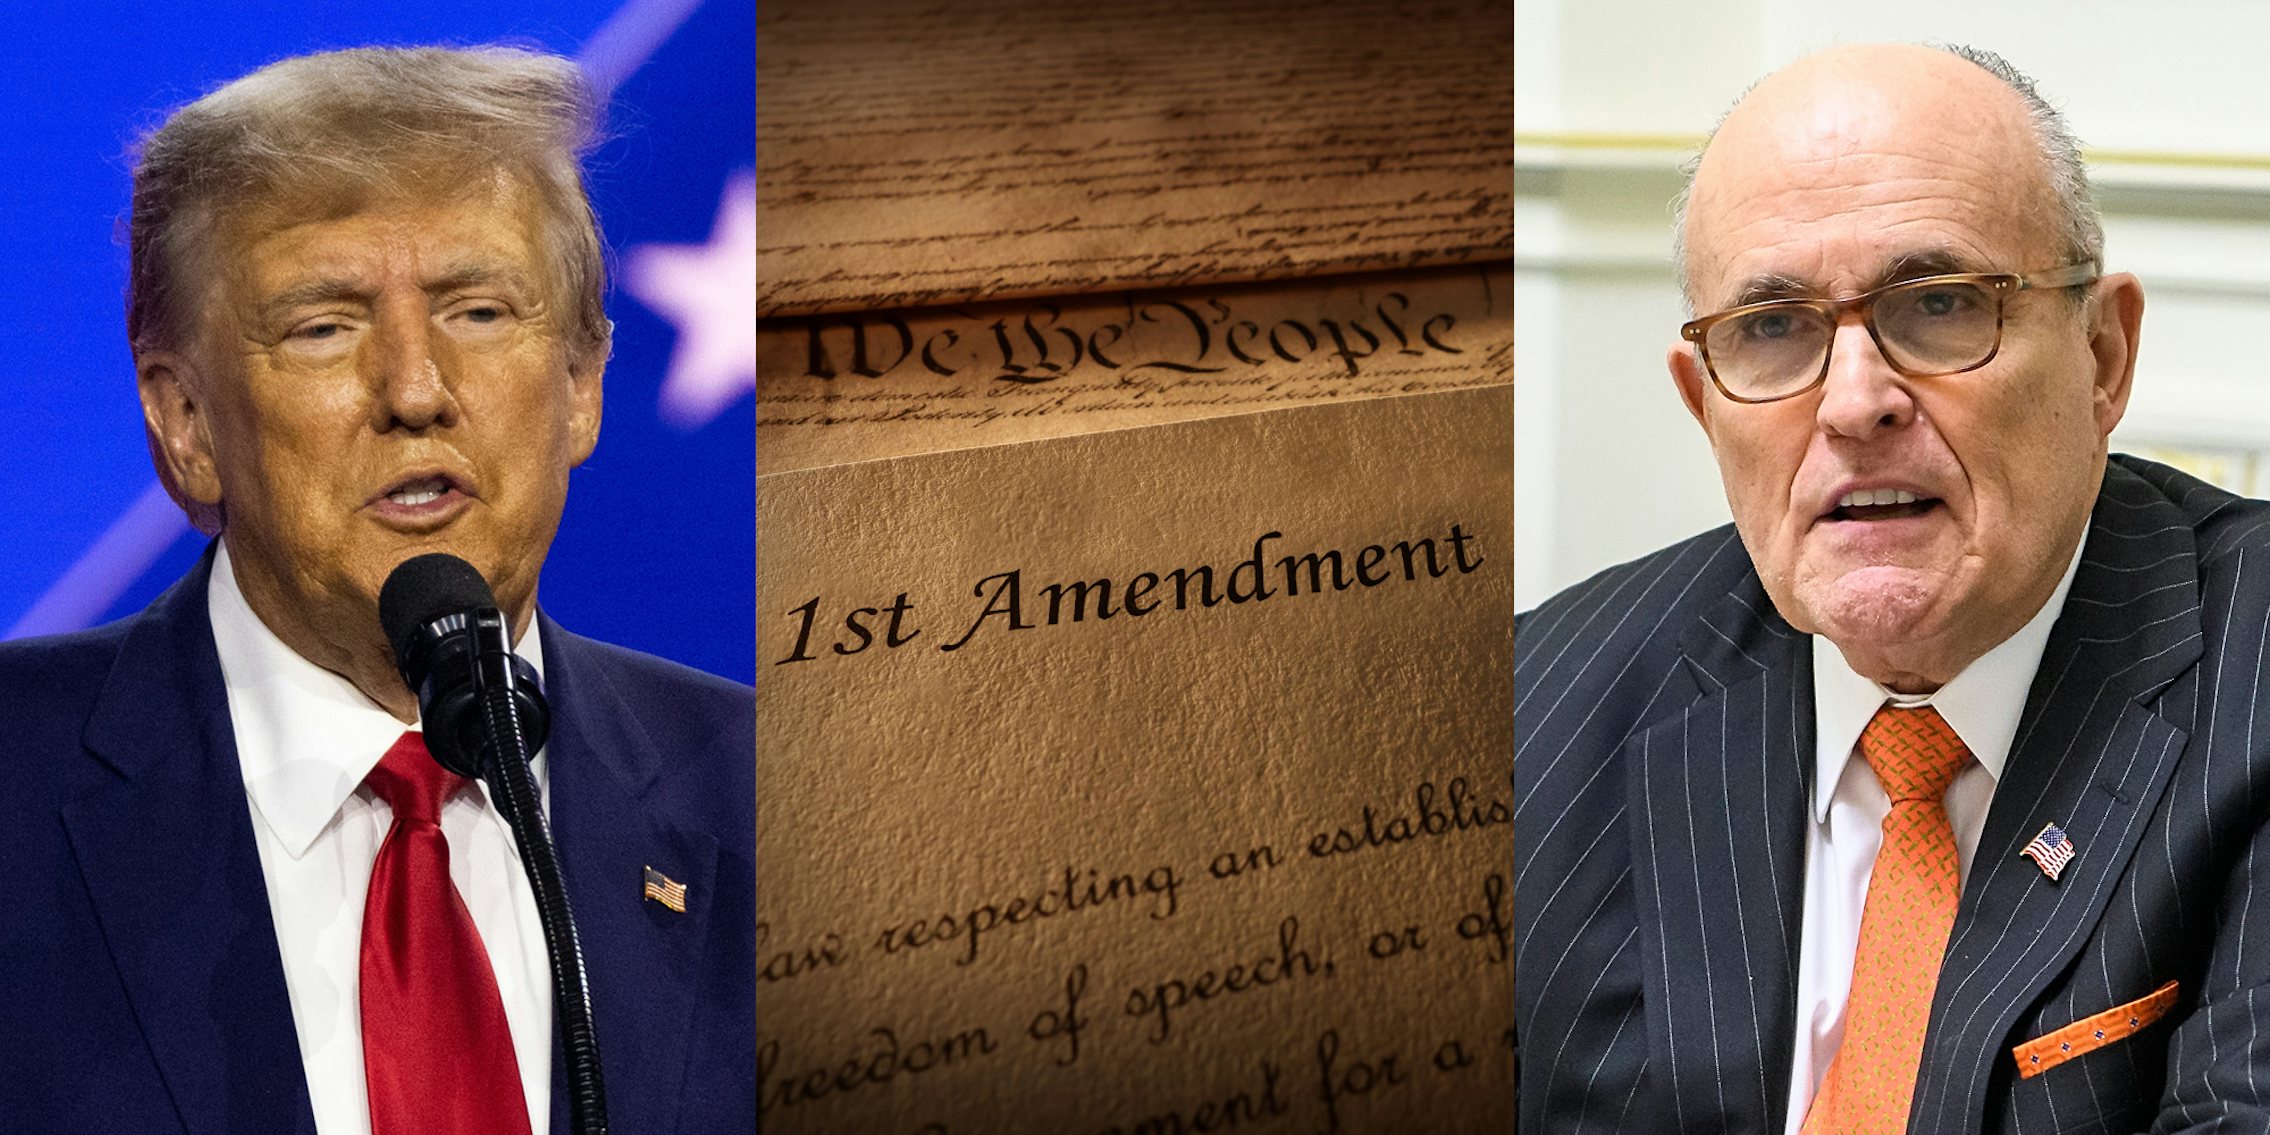 Donald Trump speaking in front of blue background (l) First Amendment in constitution (c) Rudy Giuliani speaking in front of light background (r)